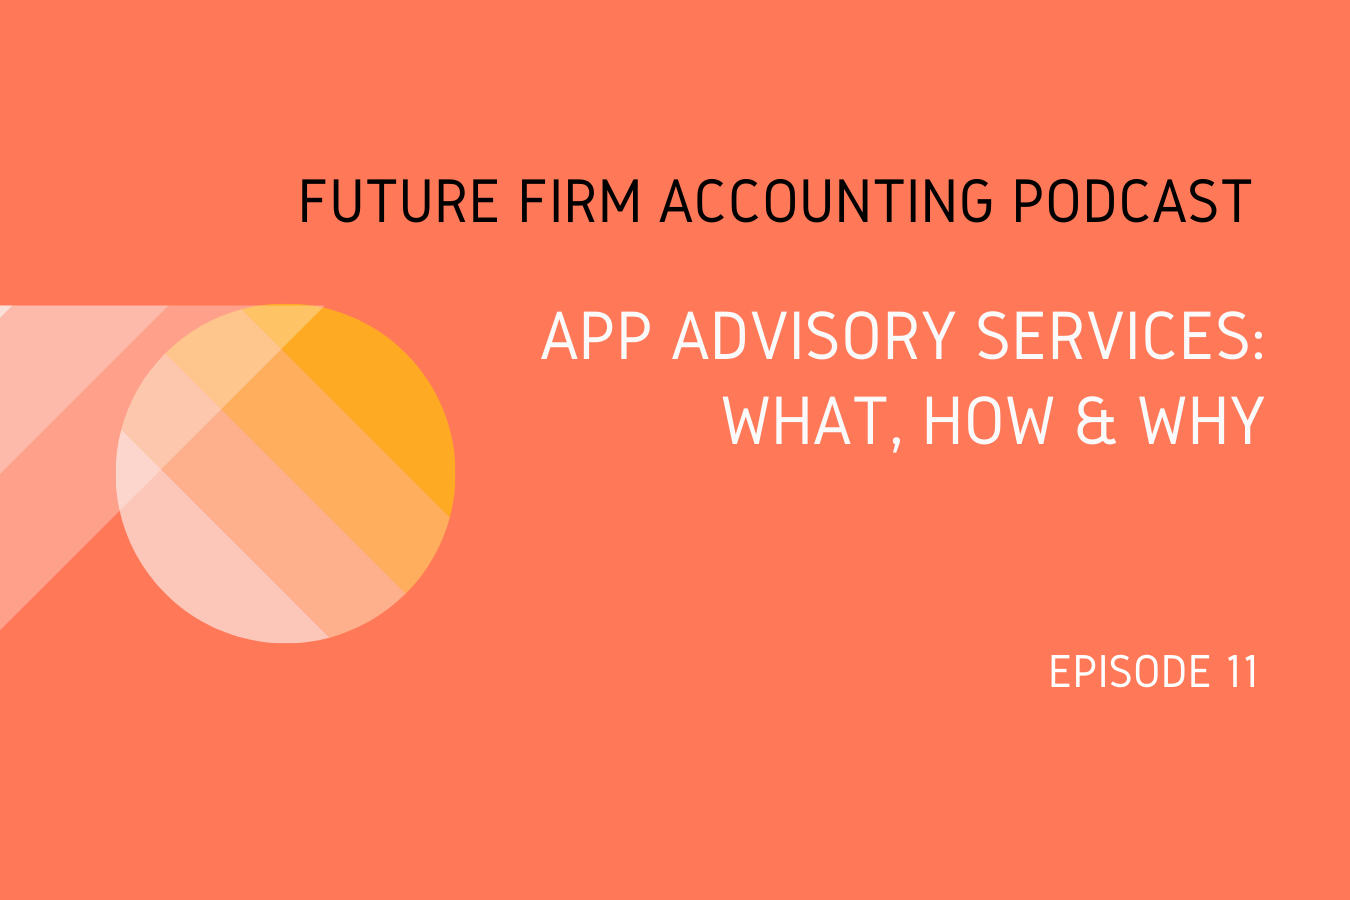 App Advisory Services What, How & Why